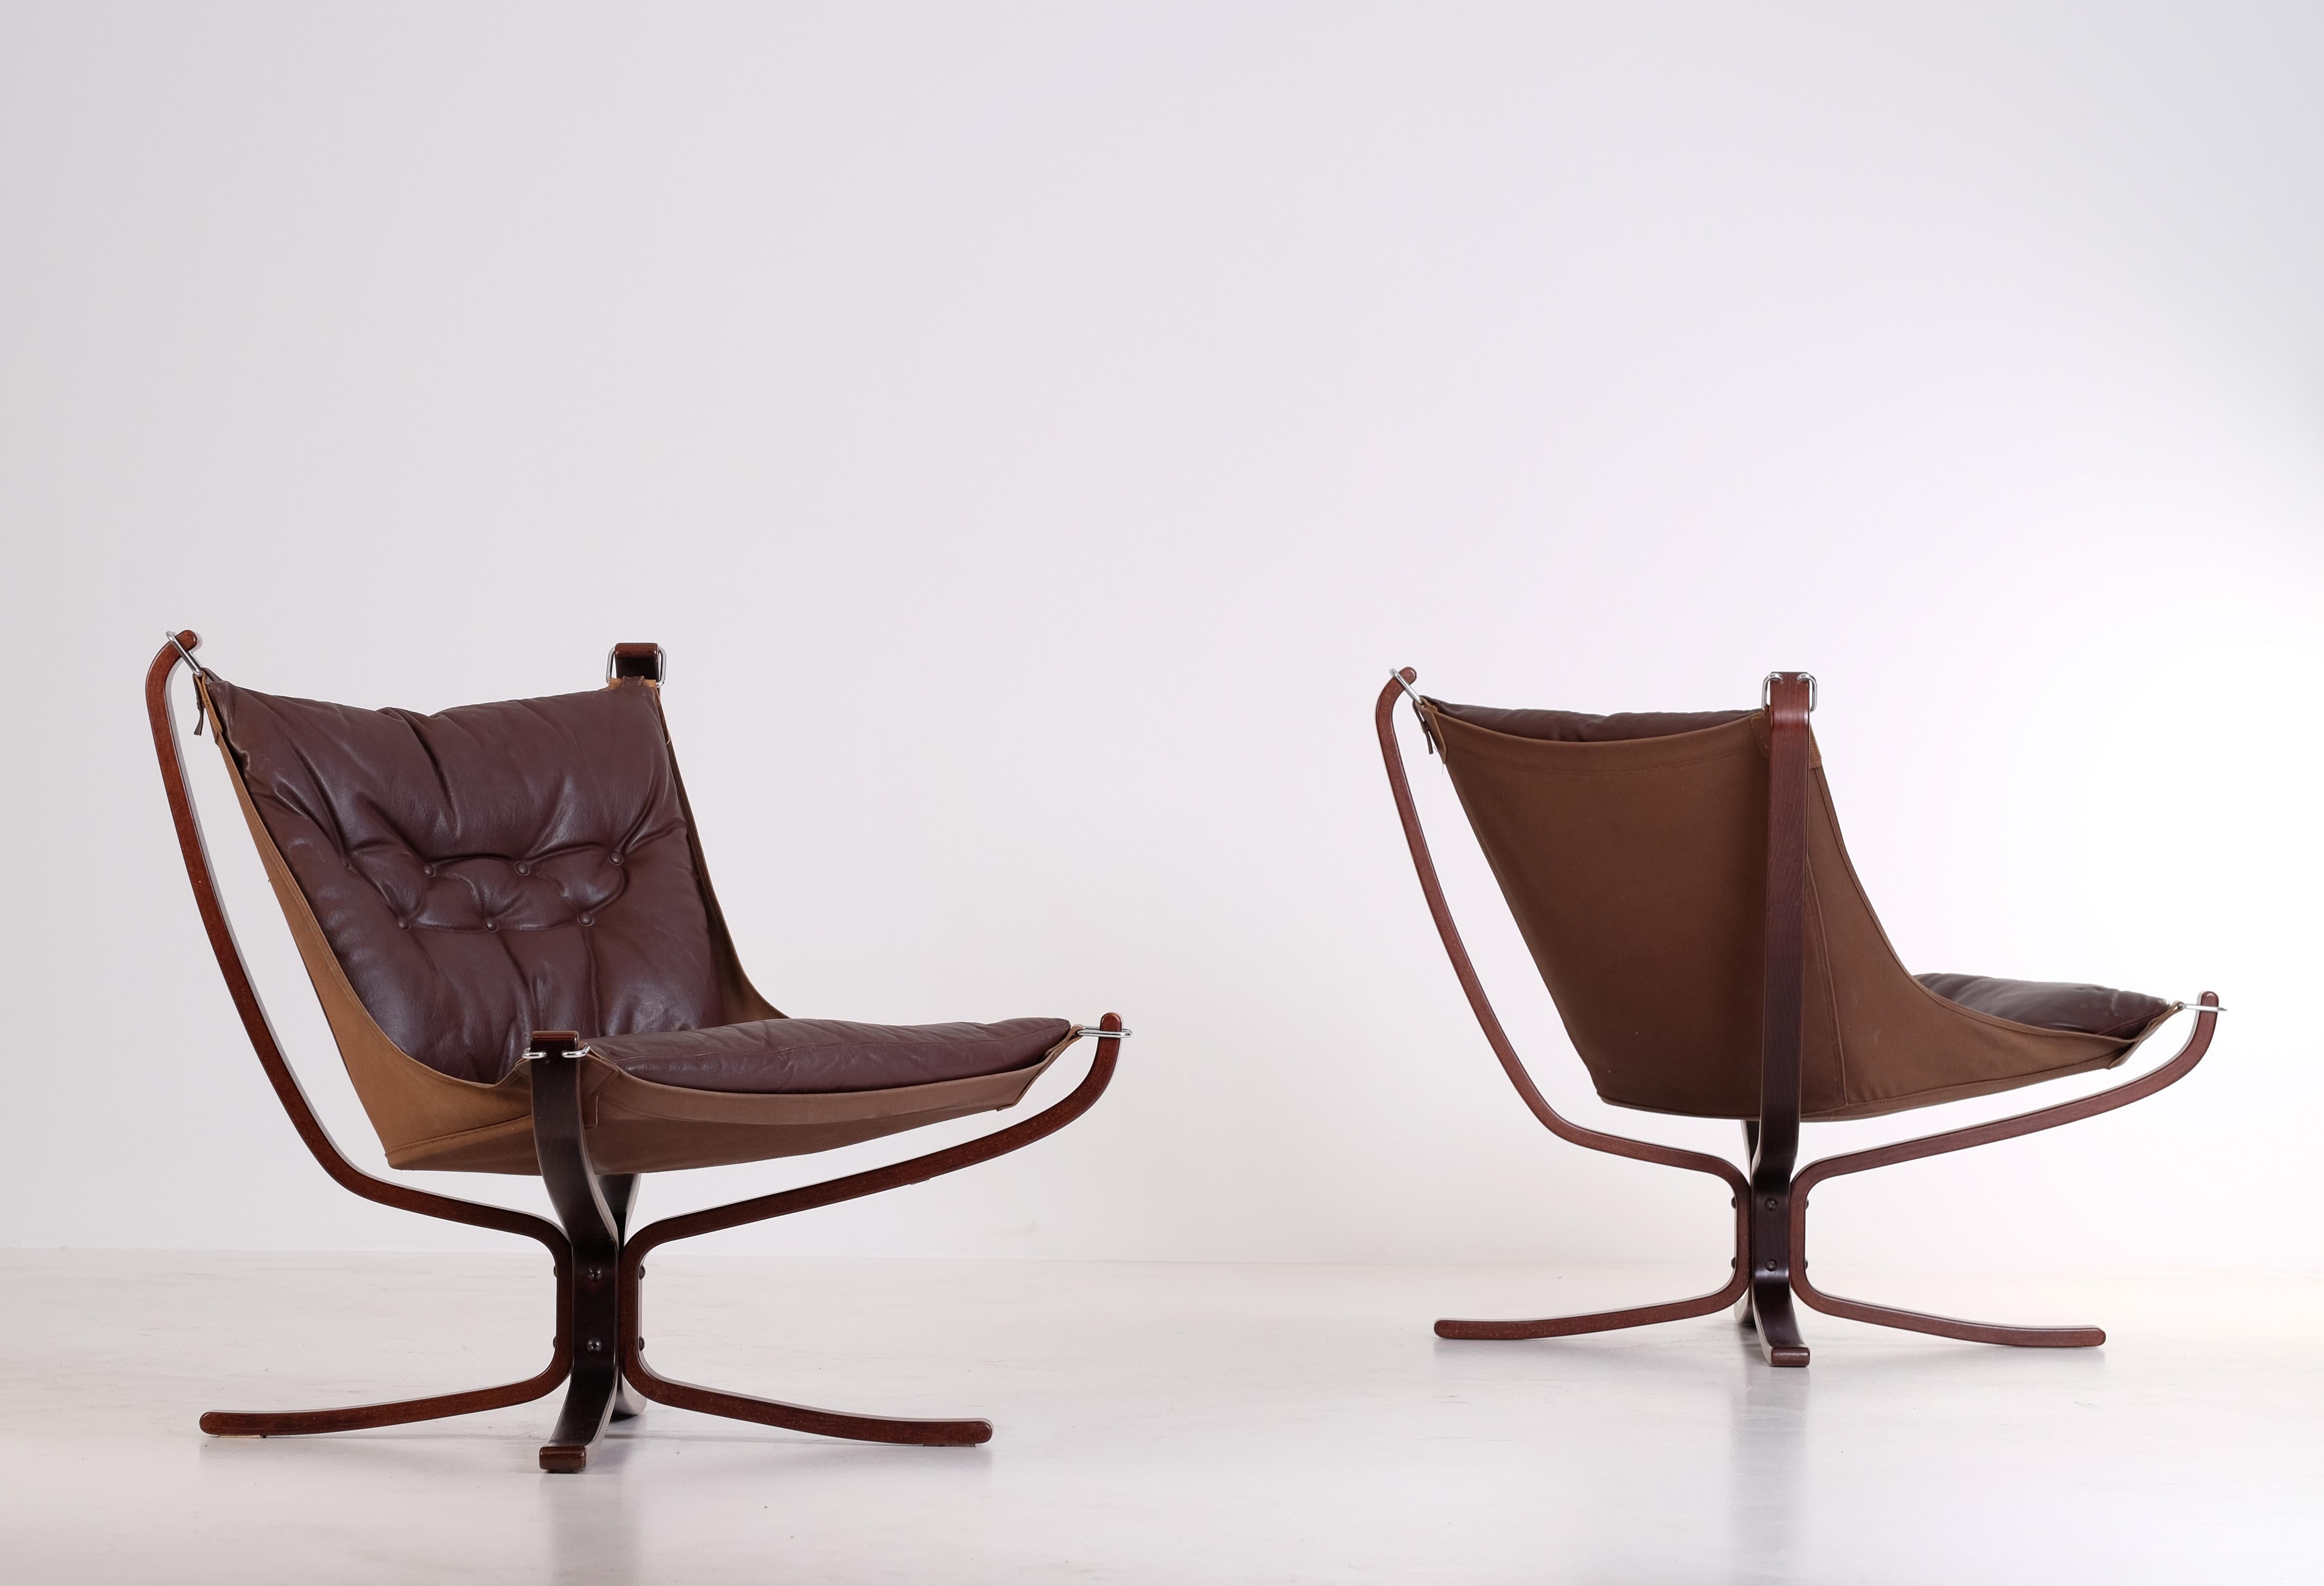 Norwegian Falcon chairs in brown leather by Sigurd Ressel, Norway, 1970s. 
Good vintage condition with signs of usage and patina.
Please note: flat-packed global shipping available: €1000.

